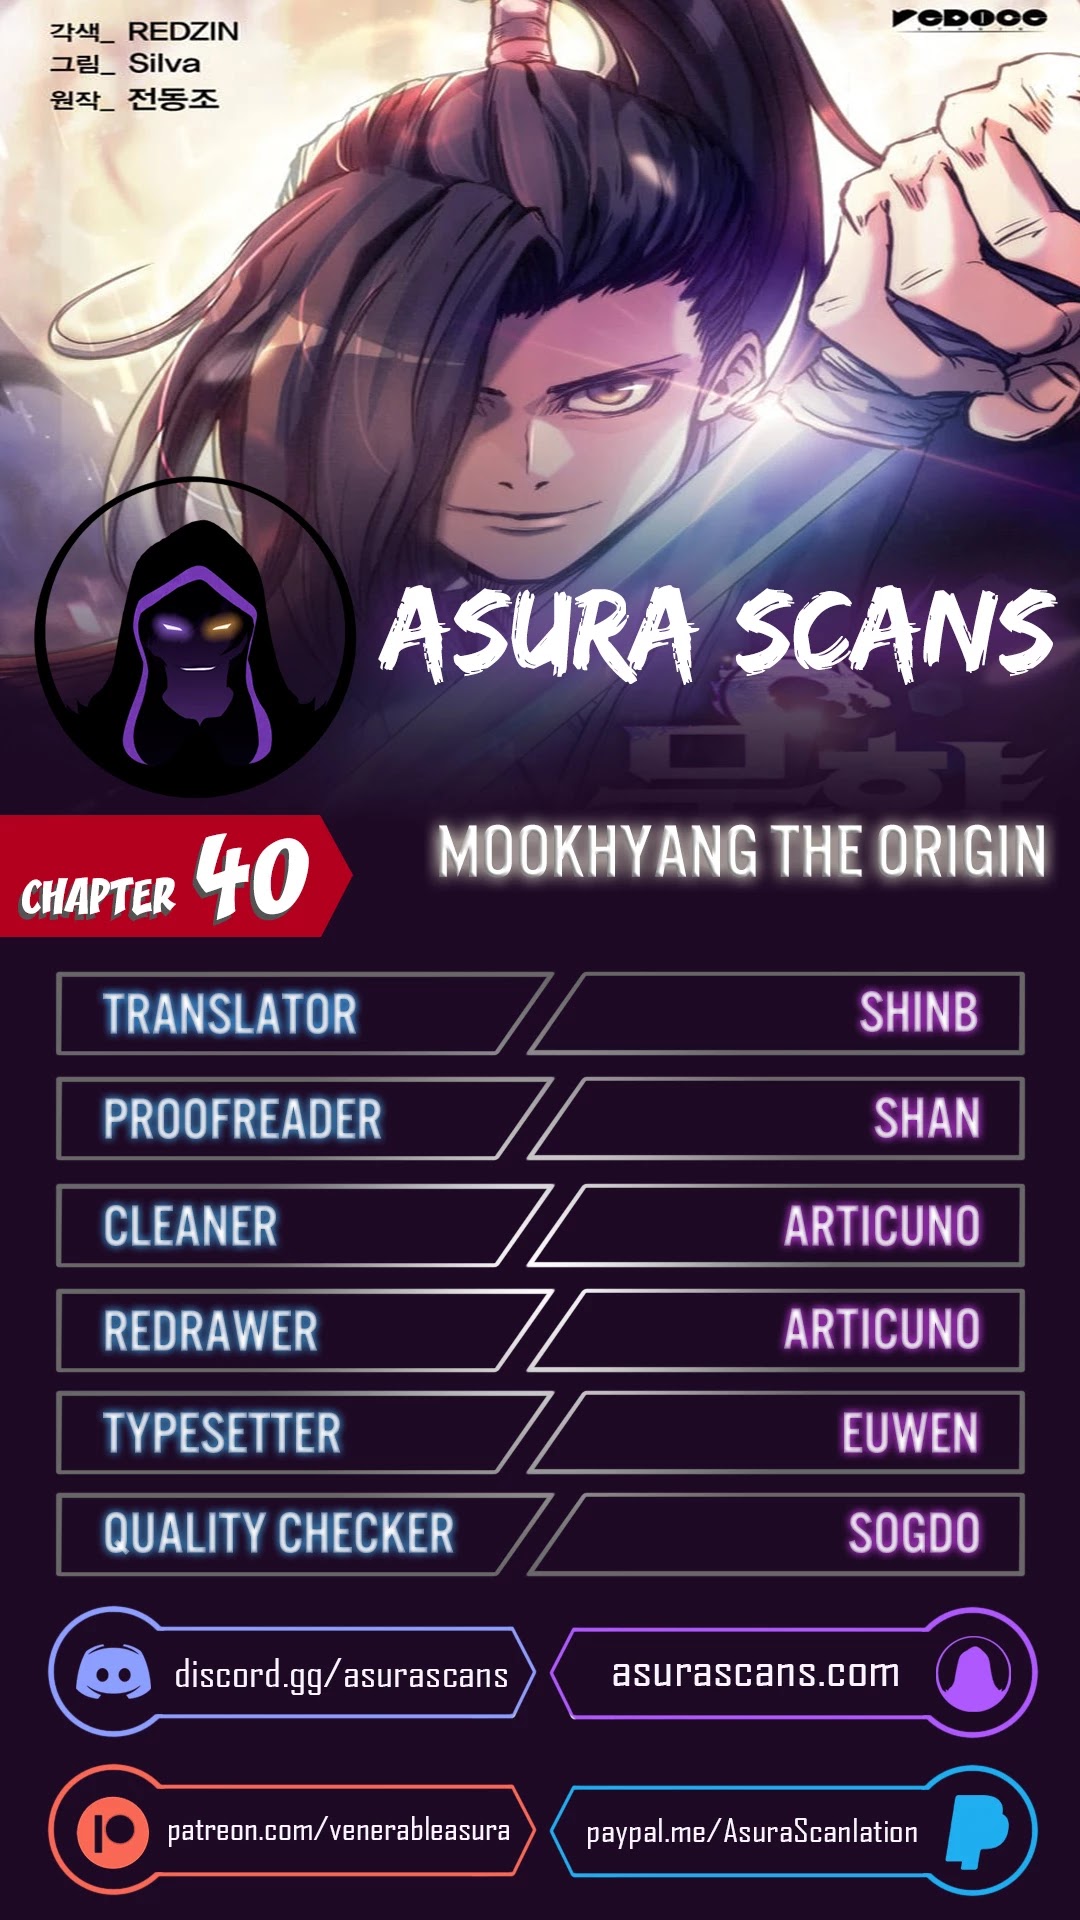 Mookhyang - The Origin Chapter 40